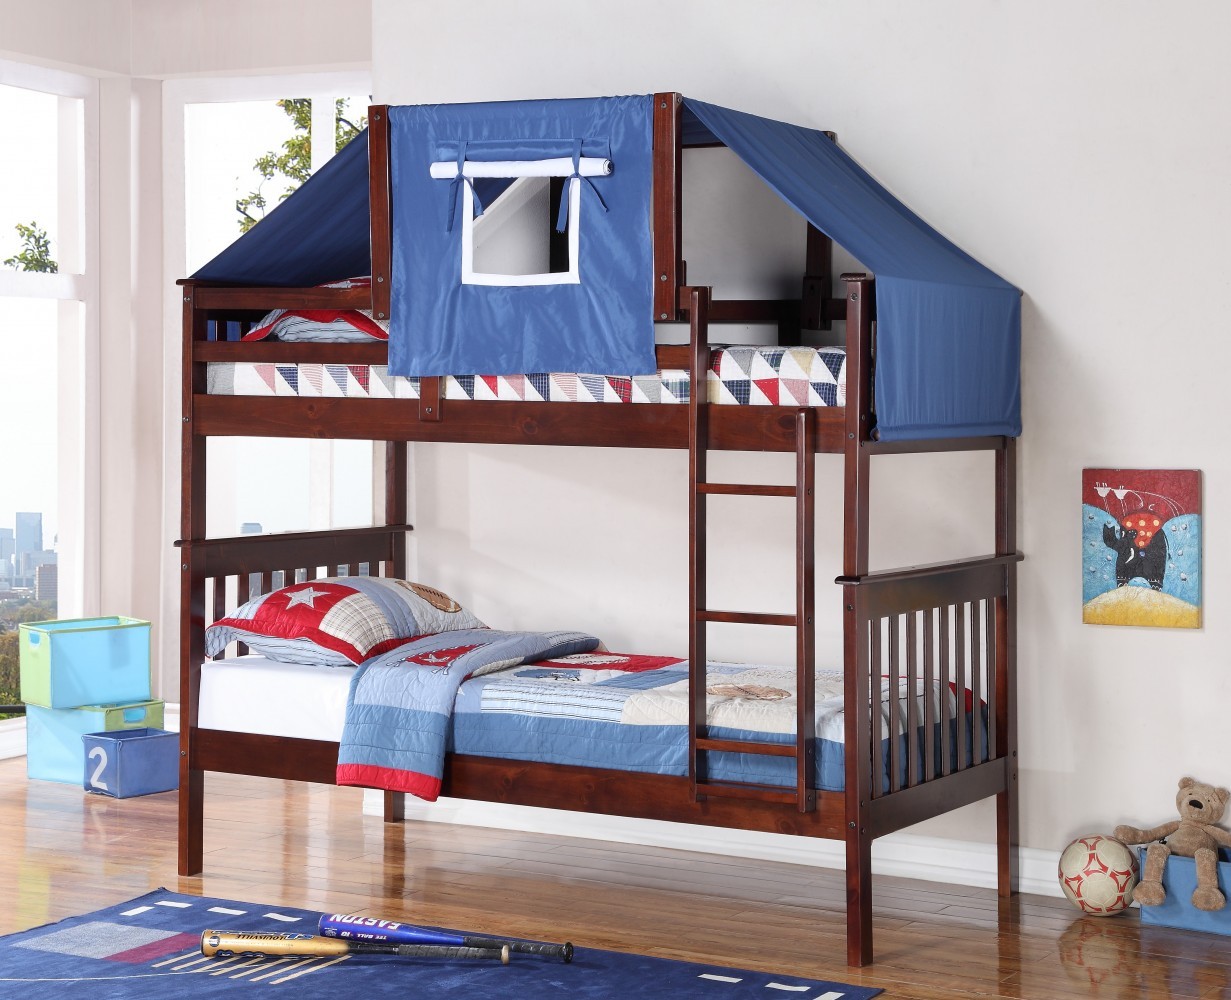 Bunkbeds Donco Trading Co, Wood Bunk Bed With Slide And Tent